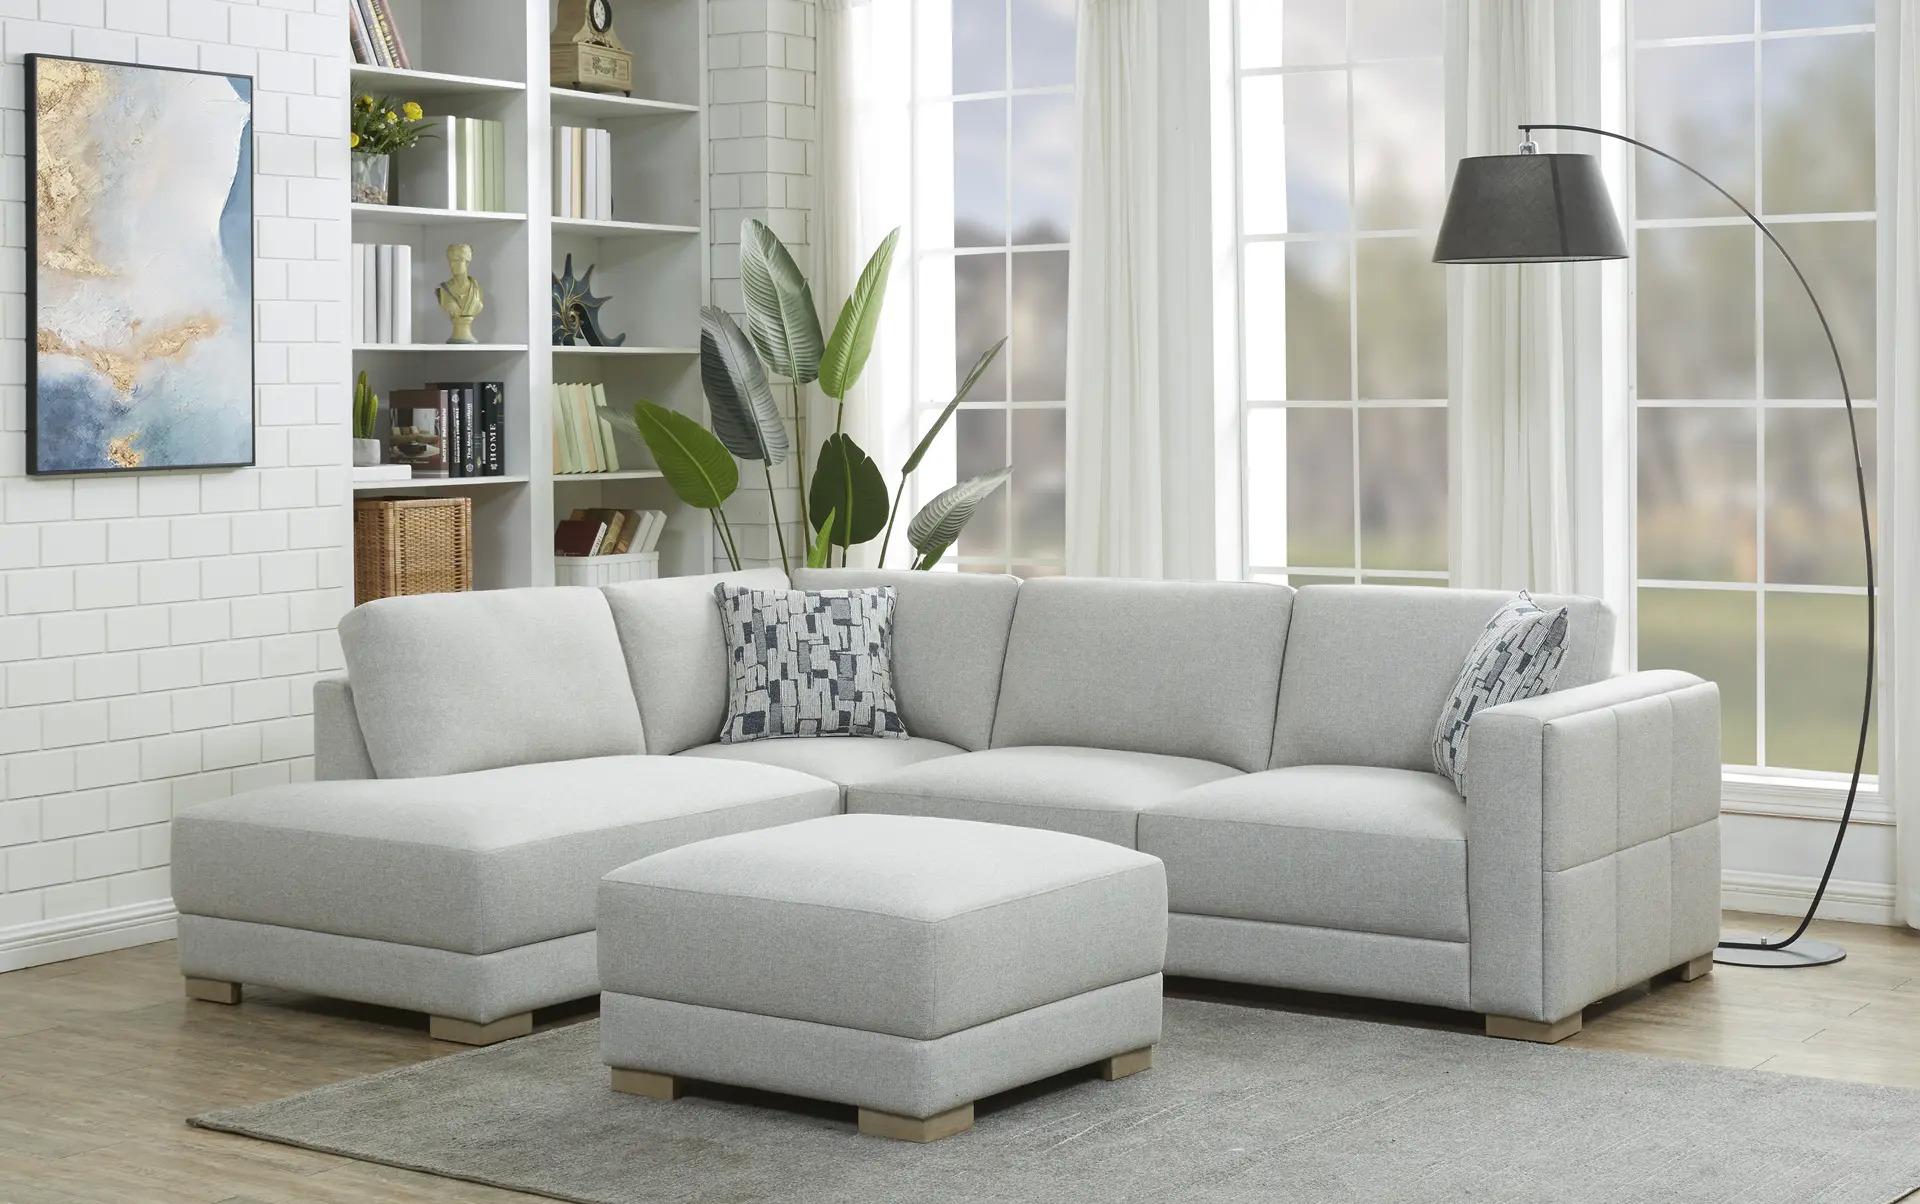 Drayden Fabric Sectional with Ottoman for $999.99 Shipped